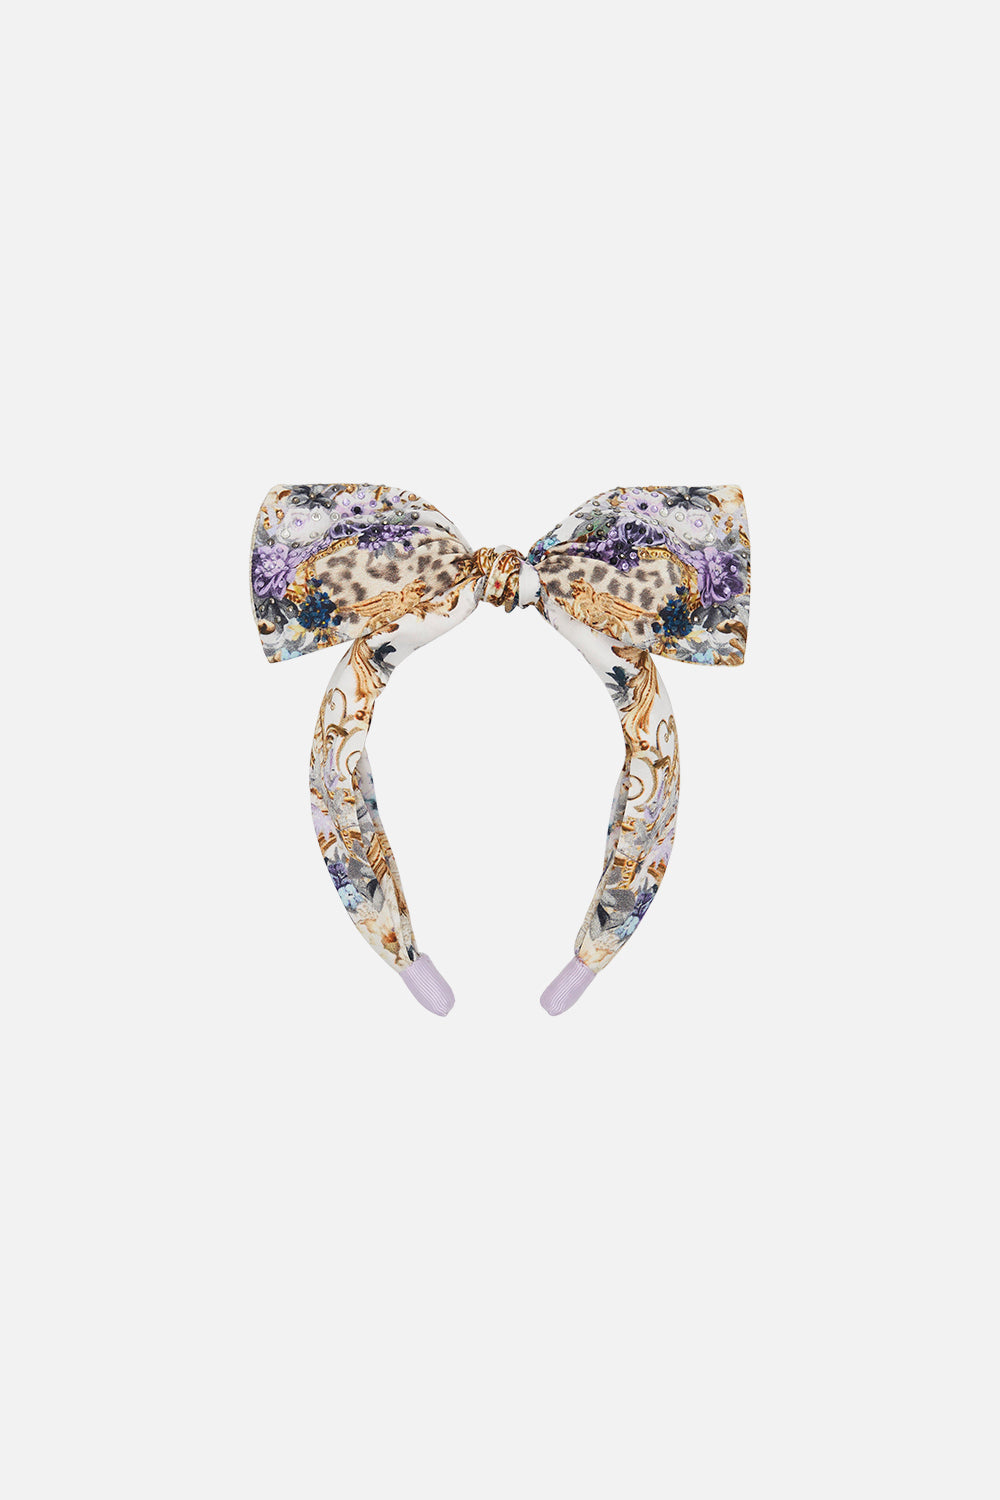 Product view of Milla By CAMILLA Kids bow headband in Palazzo Play Date print 